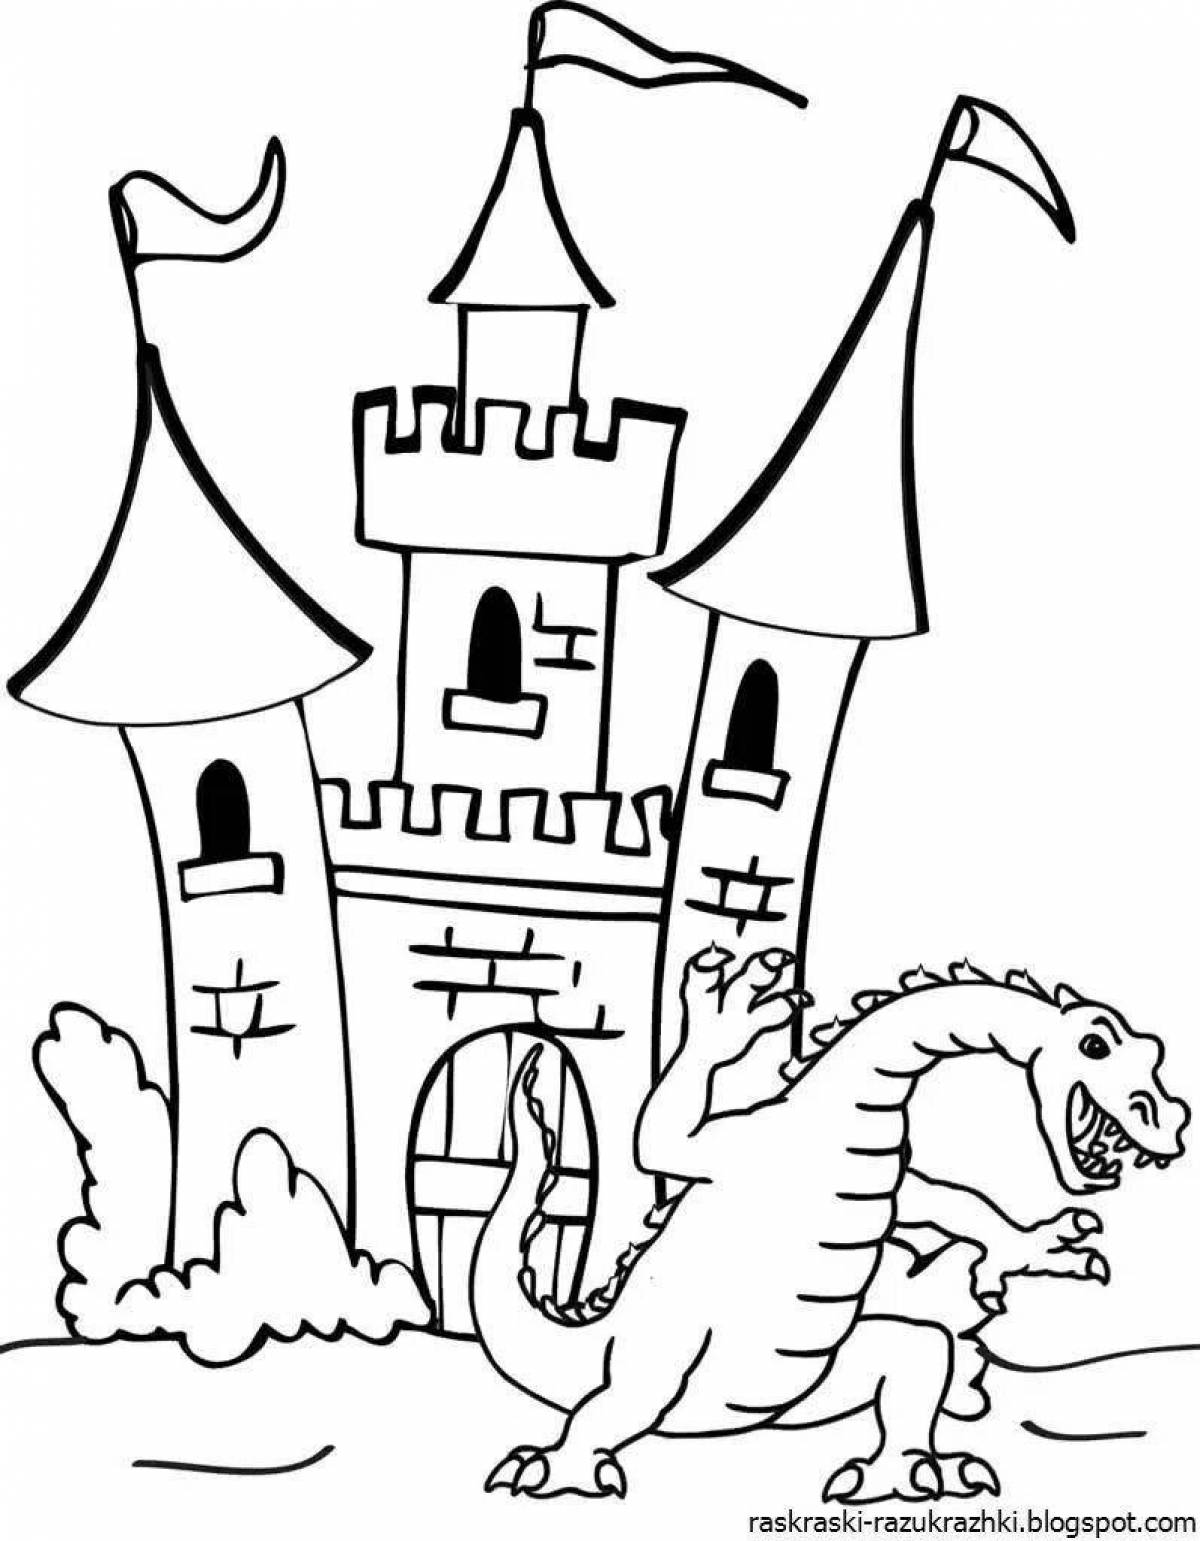 Coloring book great fairytale castle